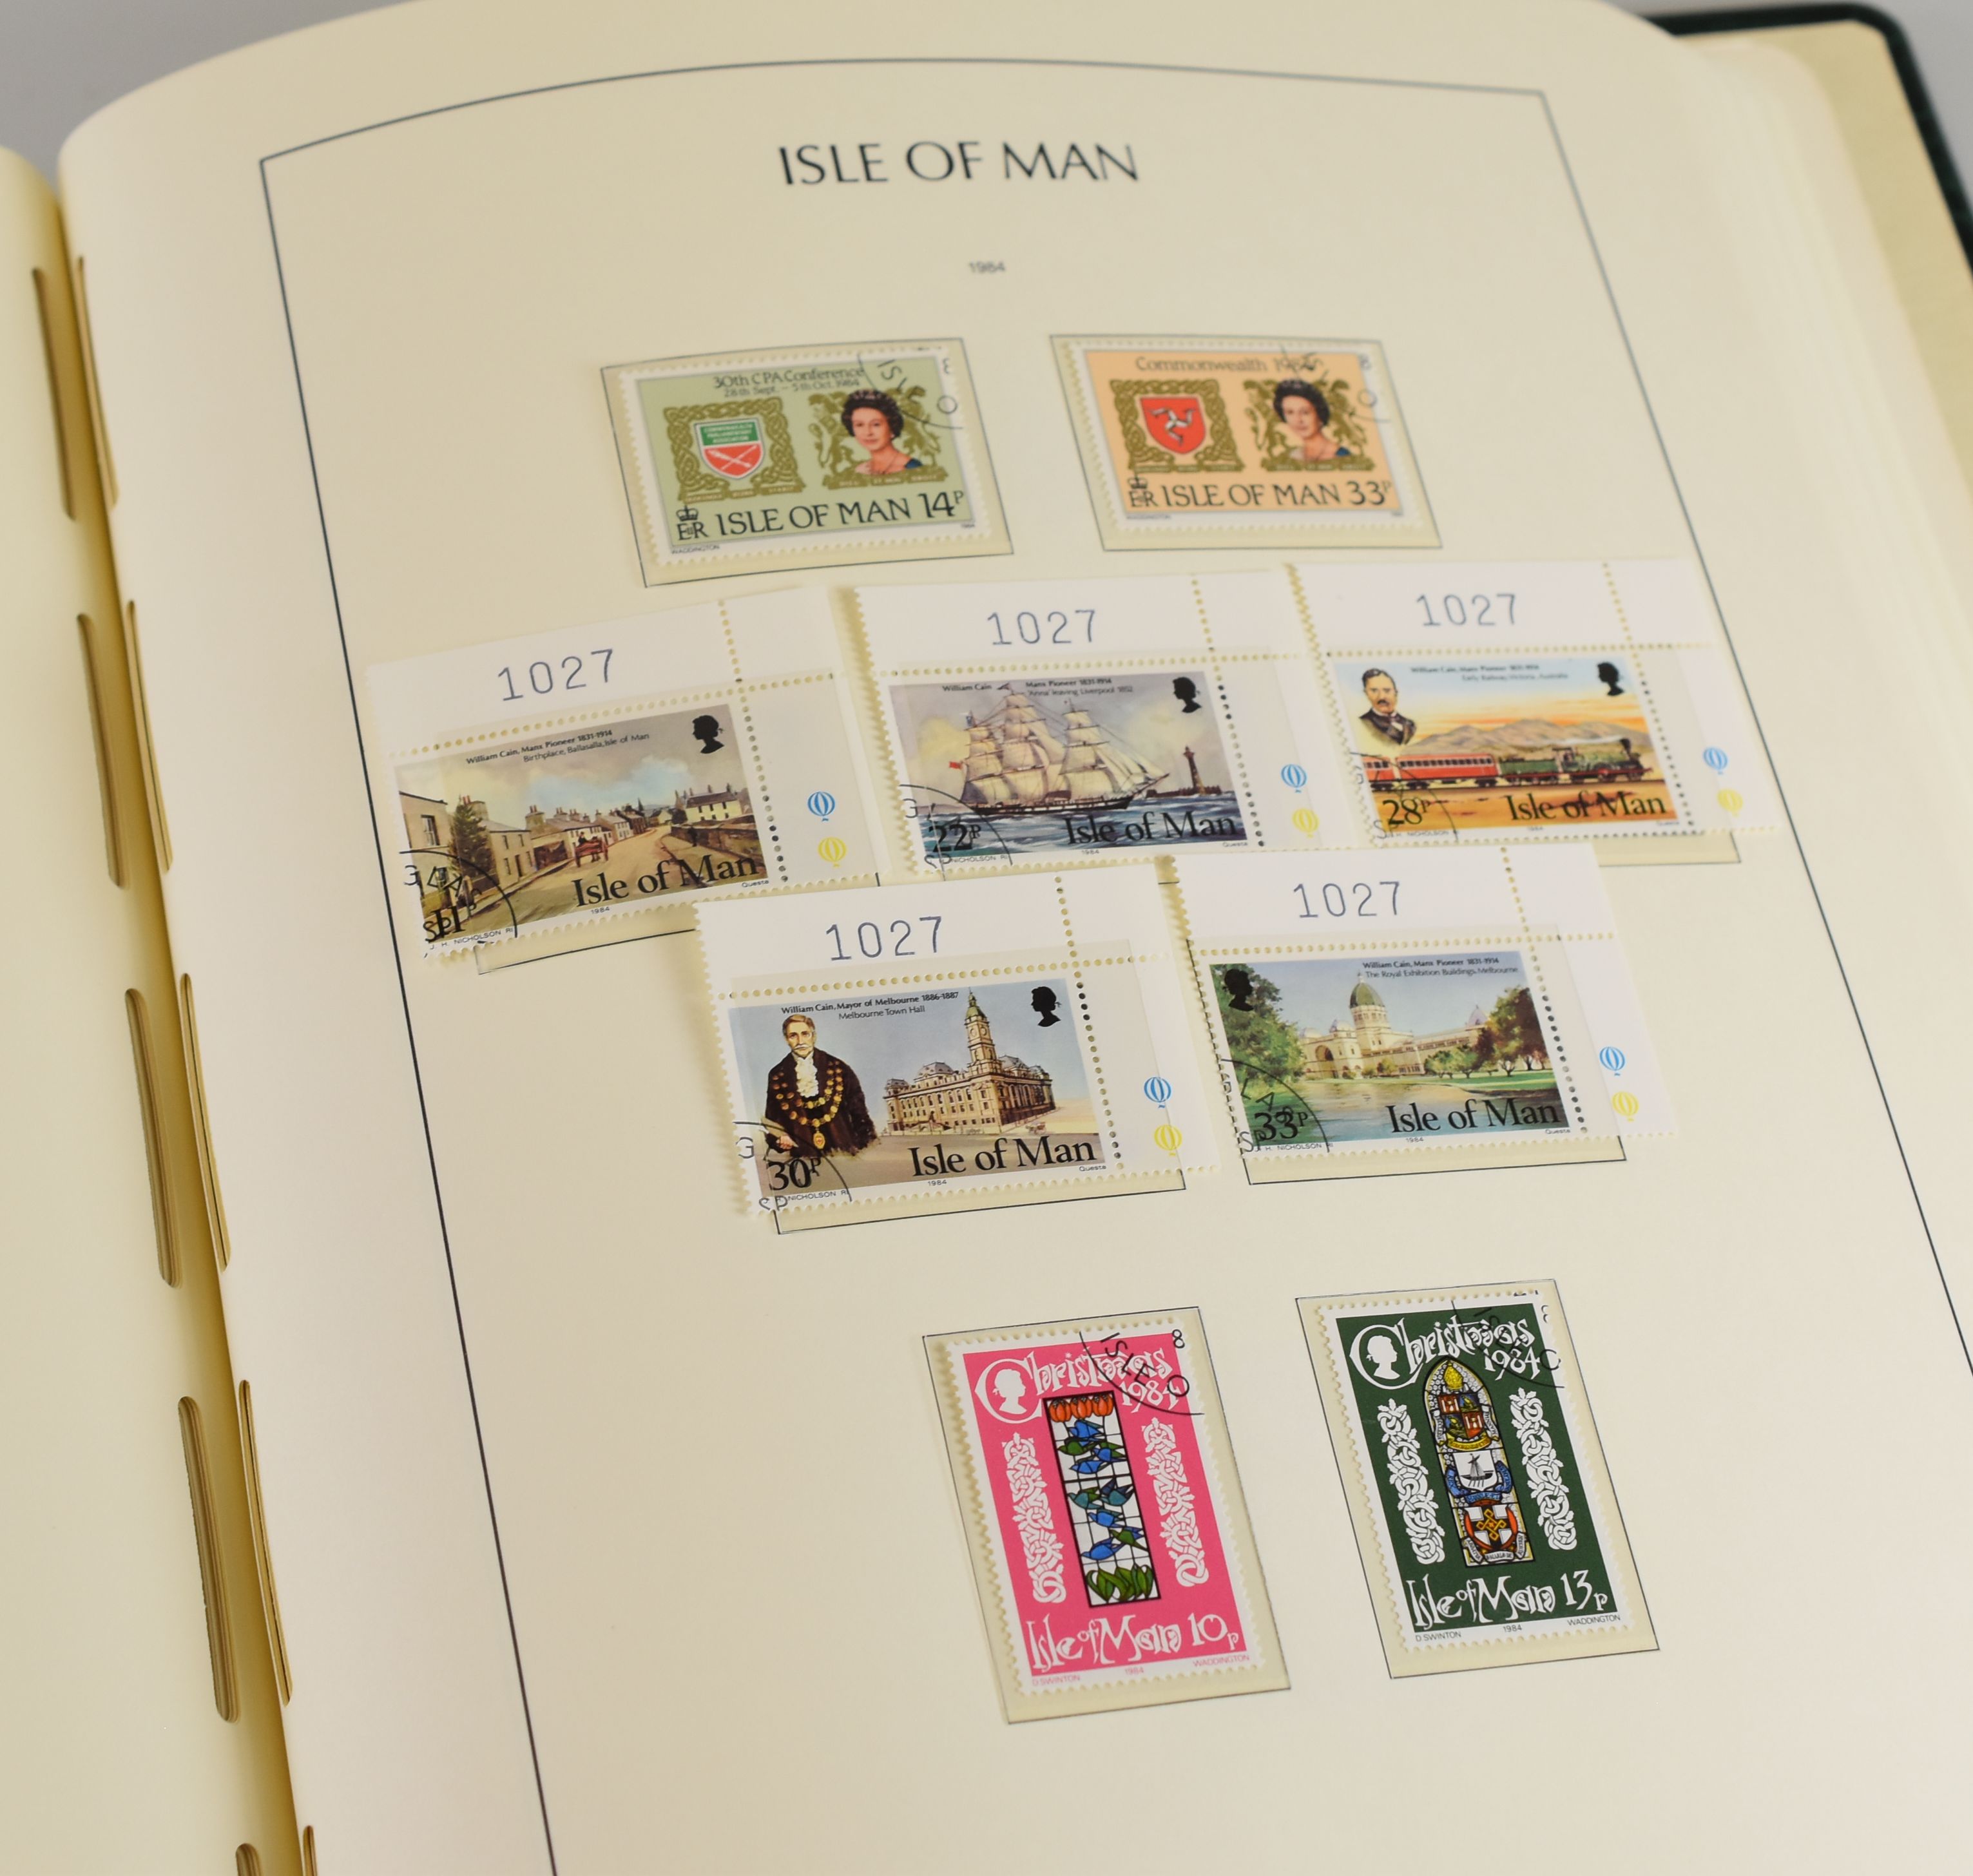 A COMPREHENSIVELY FILLED GREEN ALBUM OF ISLE OF MAN STAMPS professionally completed from 1973